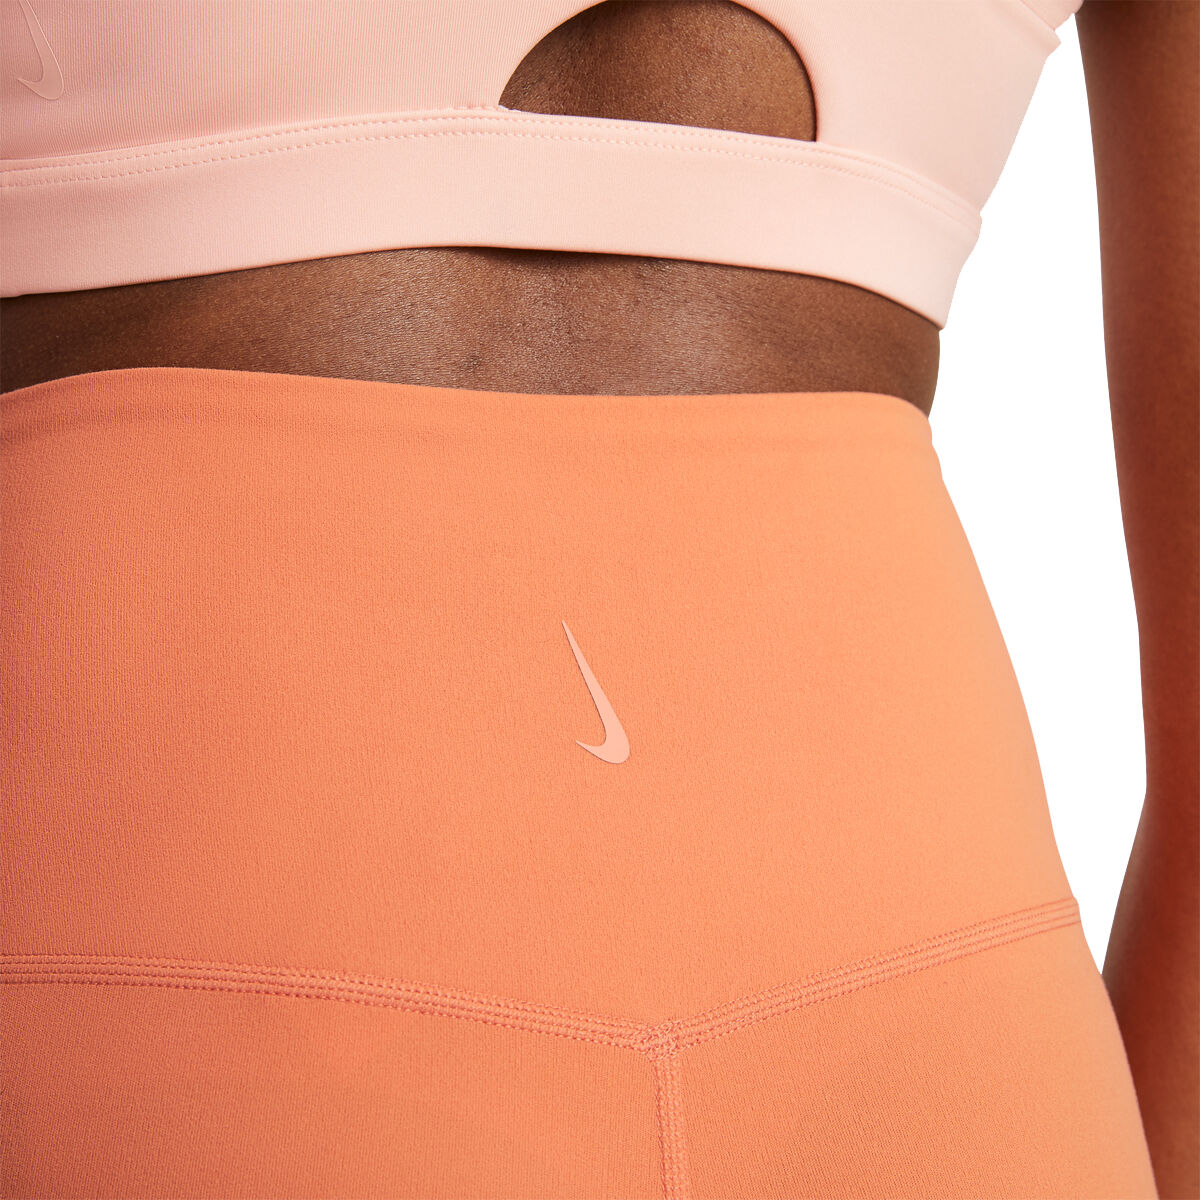 Women's, Nike Luxe 7/8 Tights